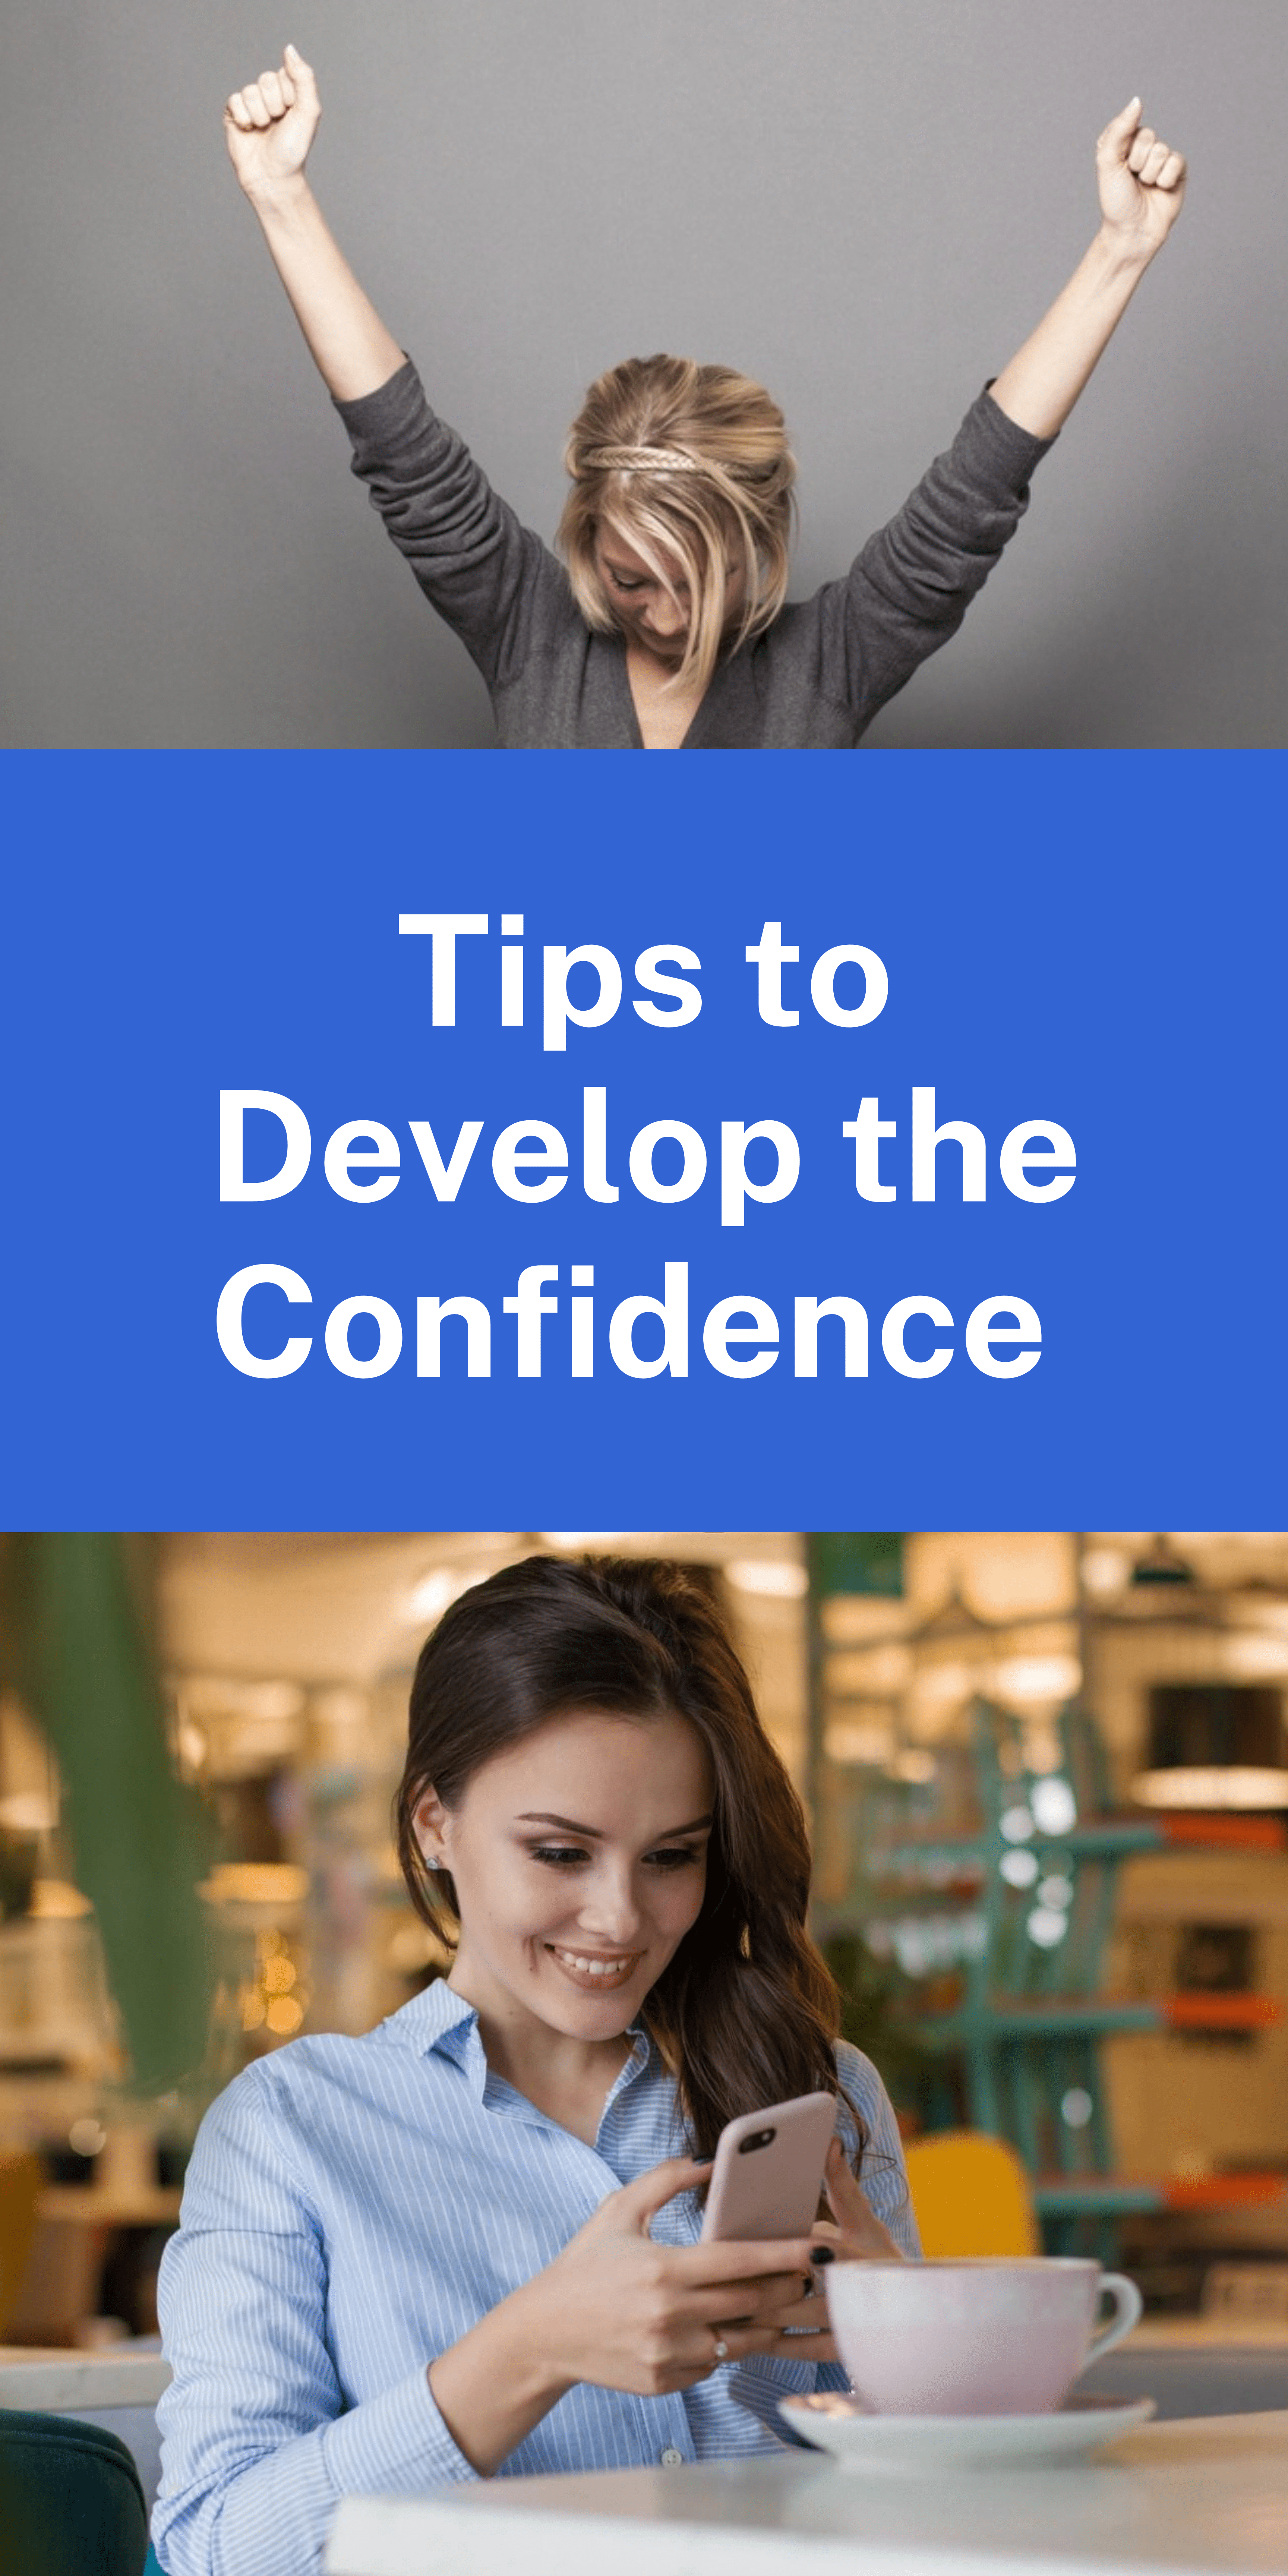 Tips to Develop the Confidence